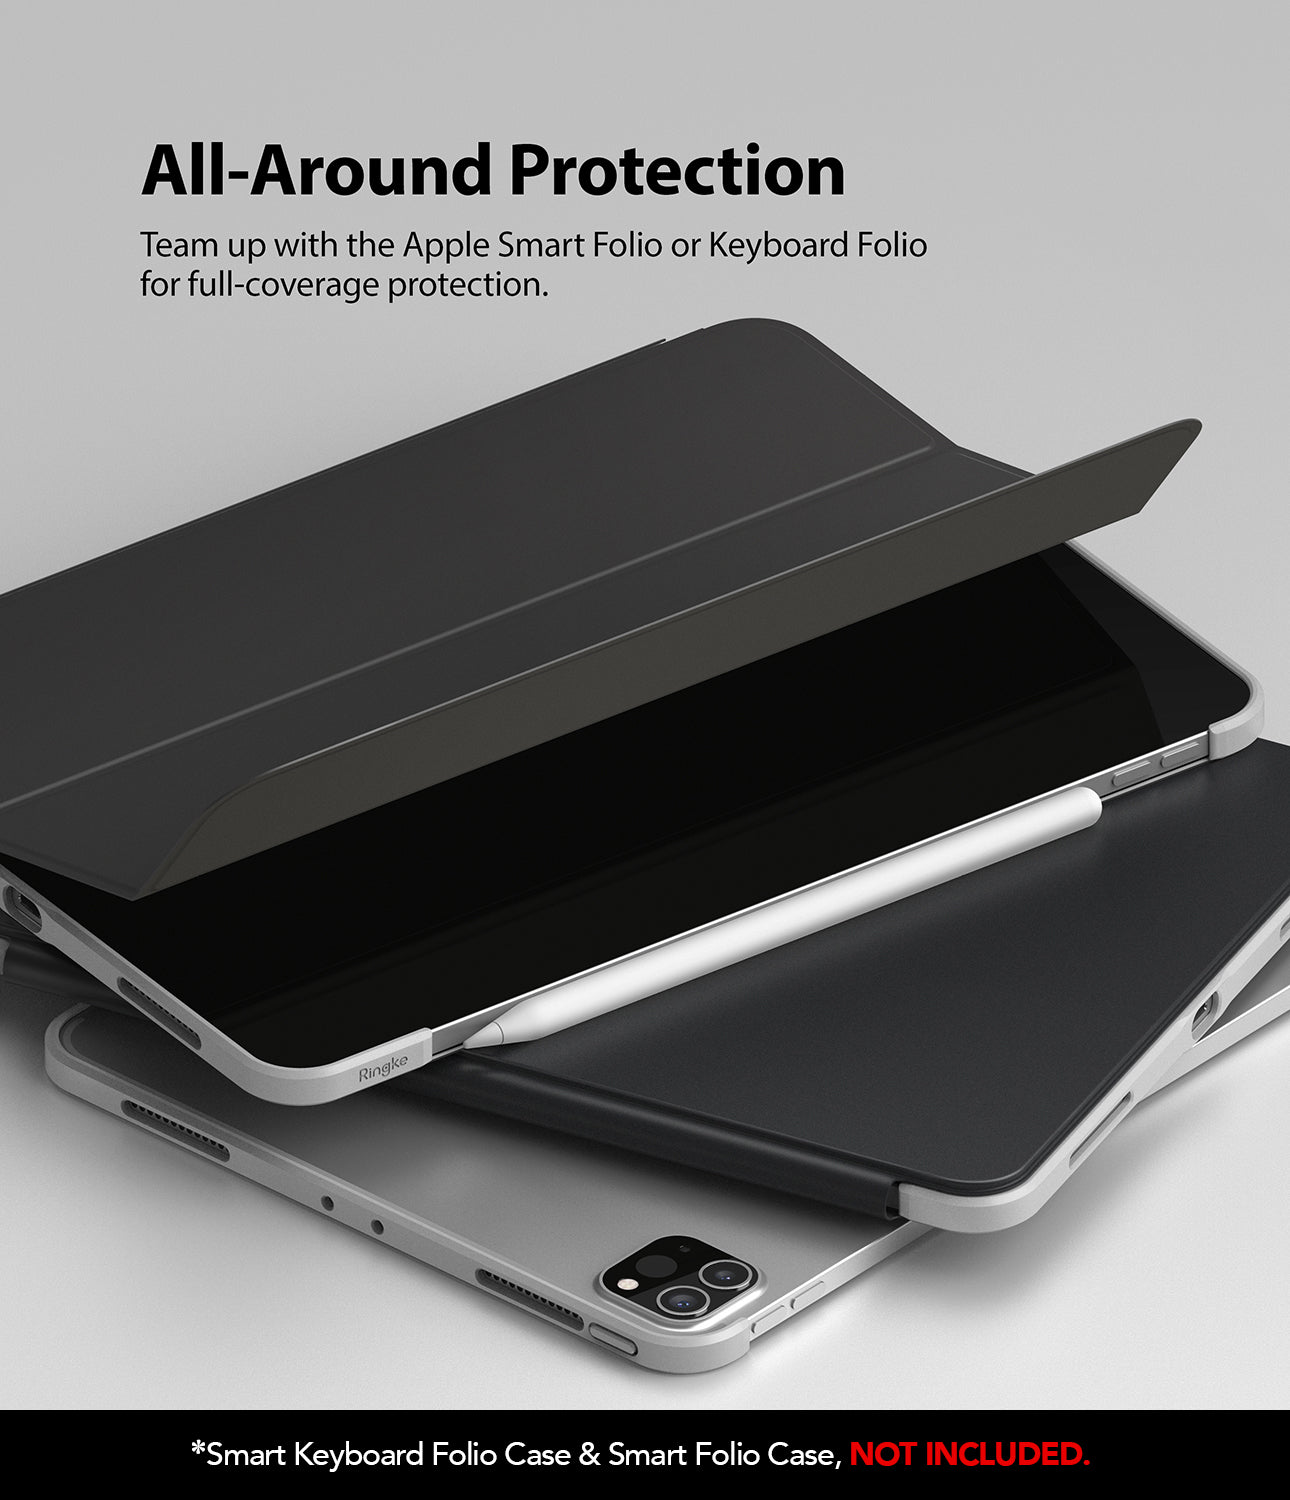 all around protection - team up with the apple smart folio or keyboard folio for full coverage protection